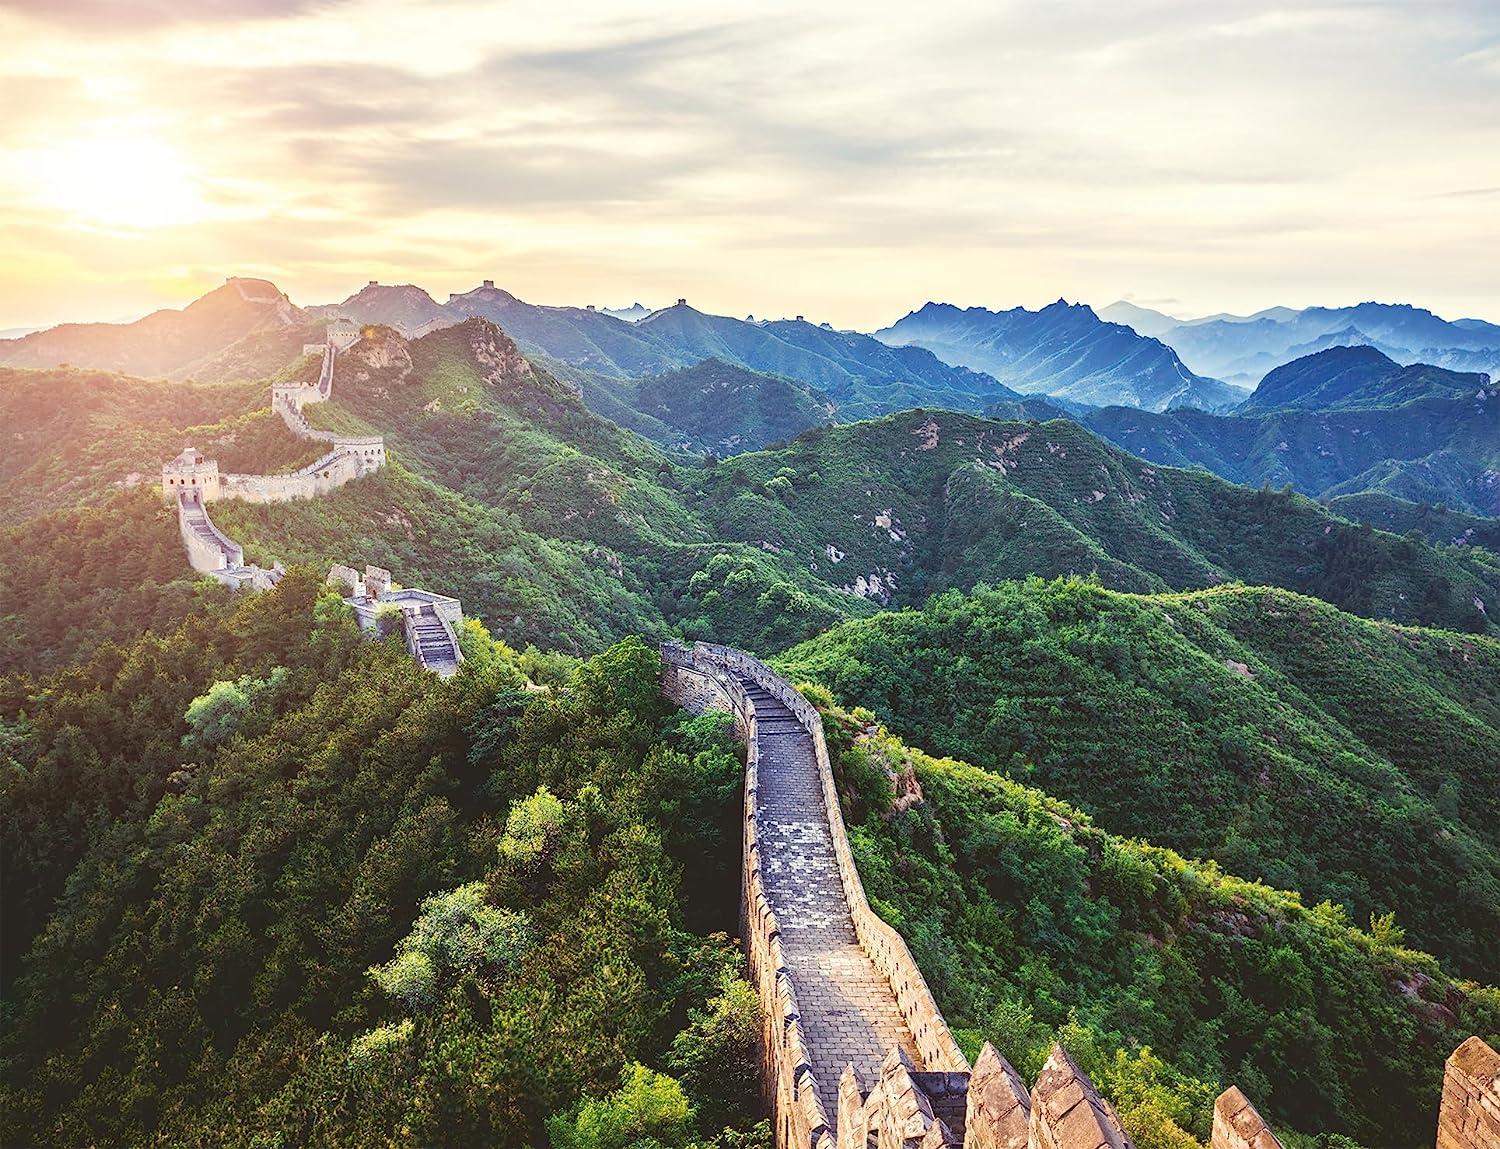 Ravensburger The Great Wall of China Jigsaw Puzzle (2000 Pieces)